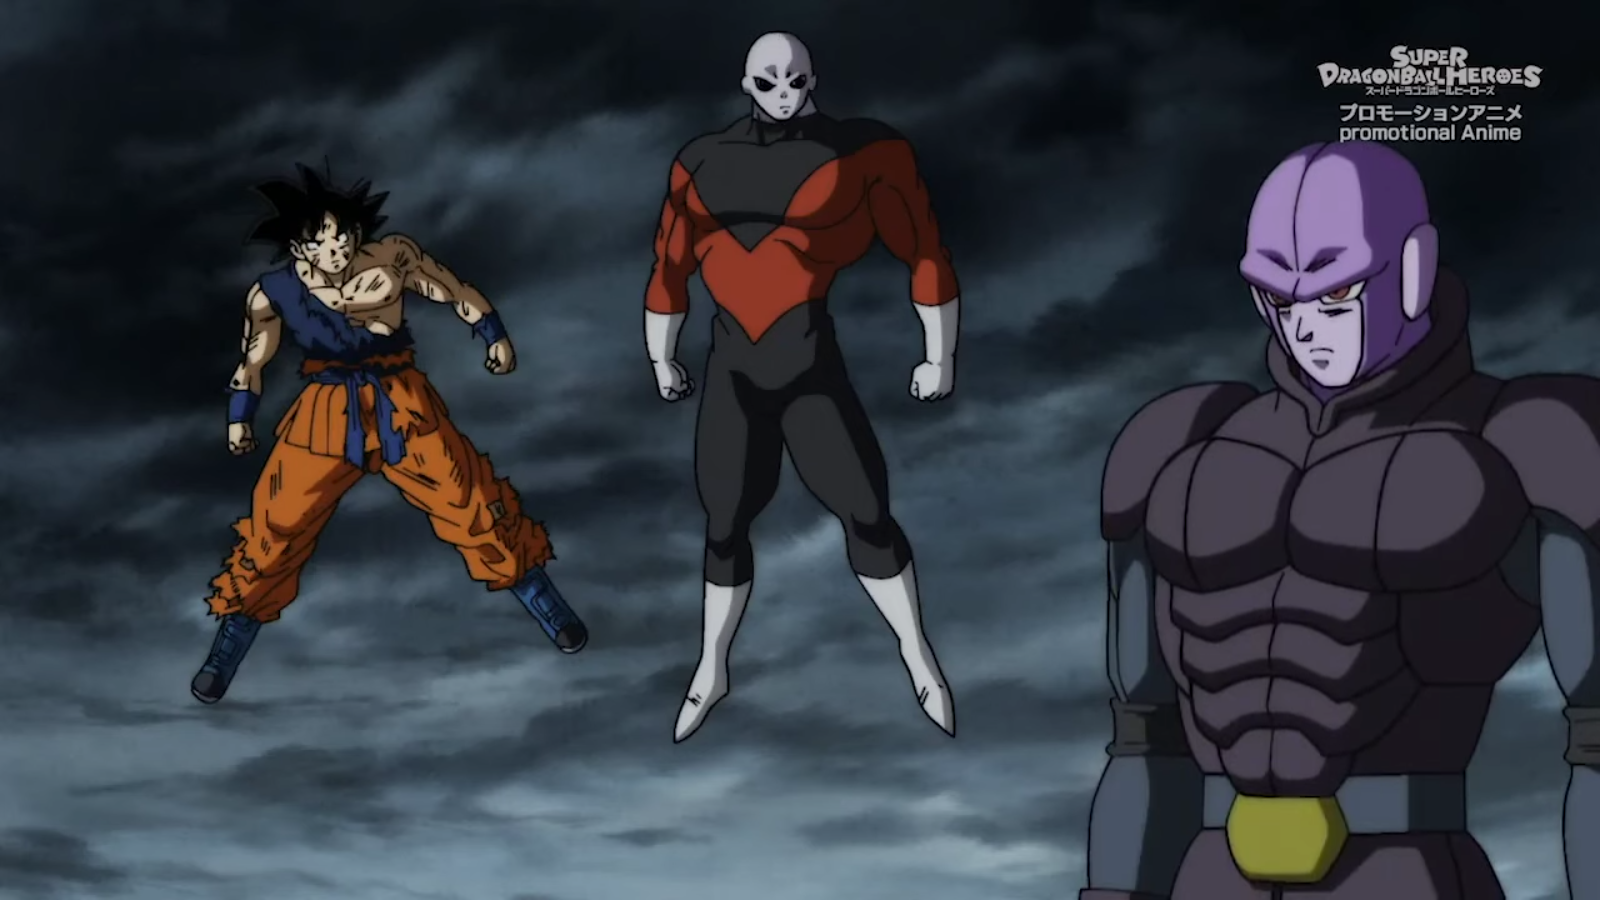 Dragon Ball Heroes Episode 17 Synopsis Teases 'Universal Conflict' Arc's  Final Battle